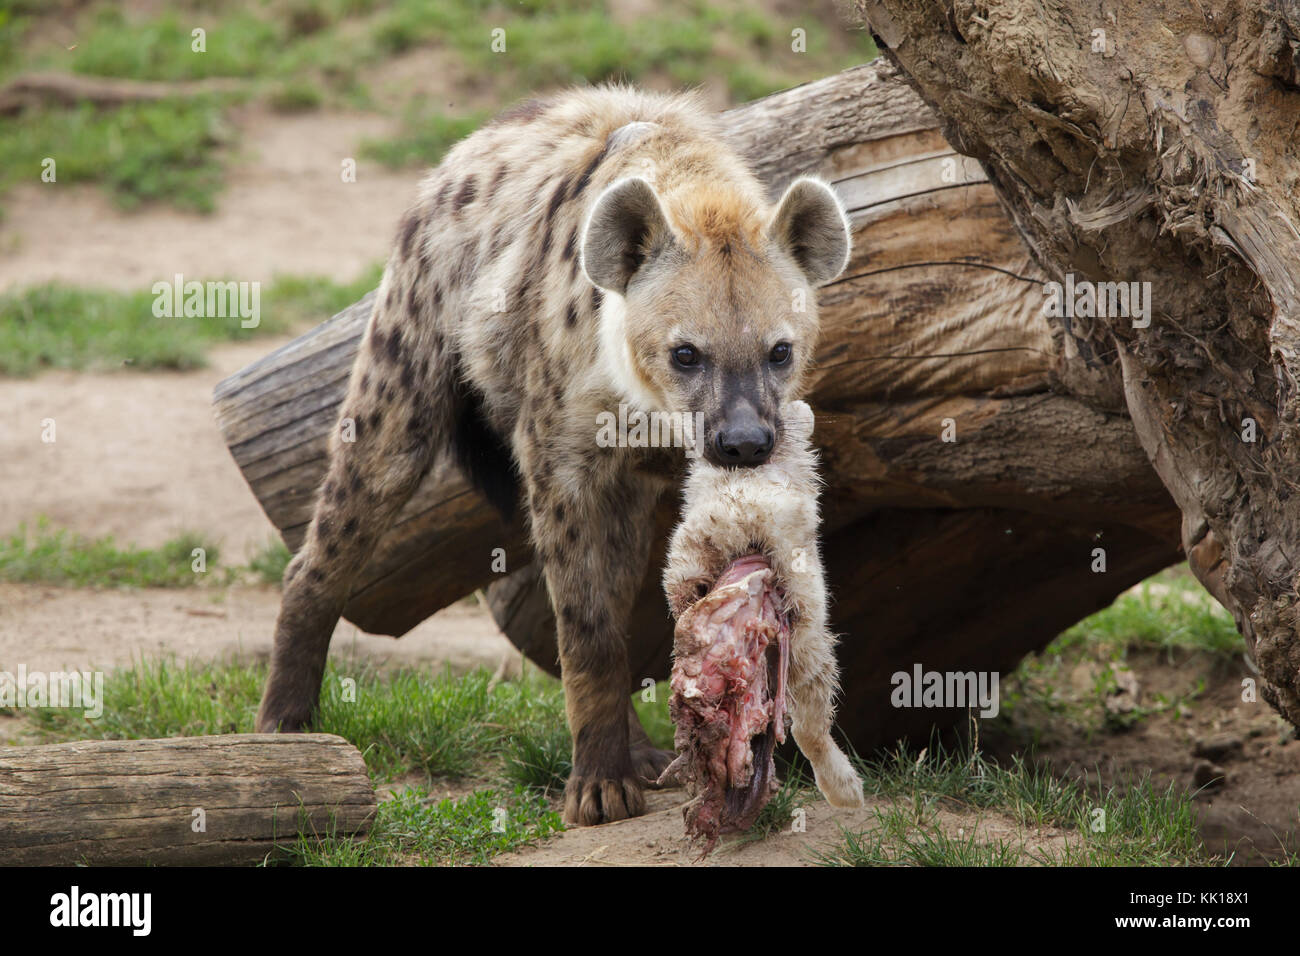 Spotted hyena (Crocuta crocuta), also known as the laughing hyena. Stock Photo